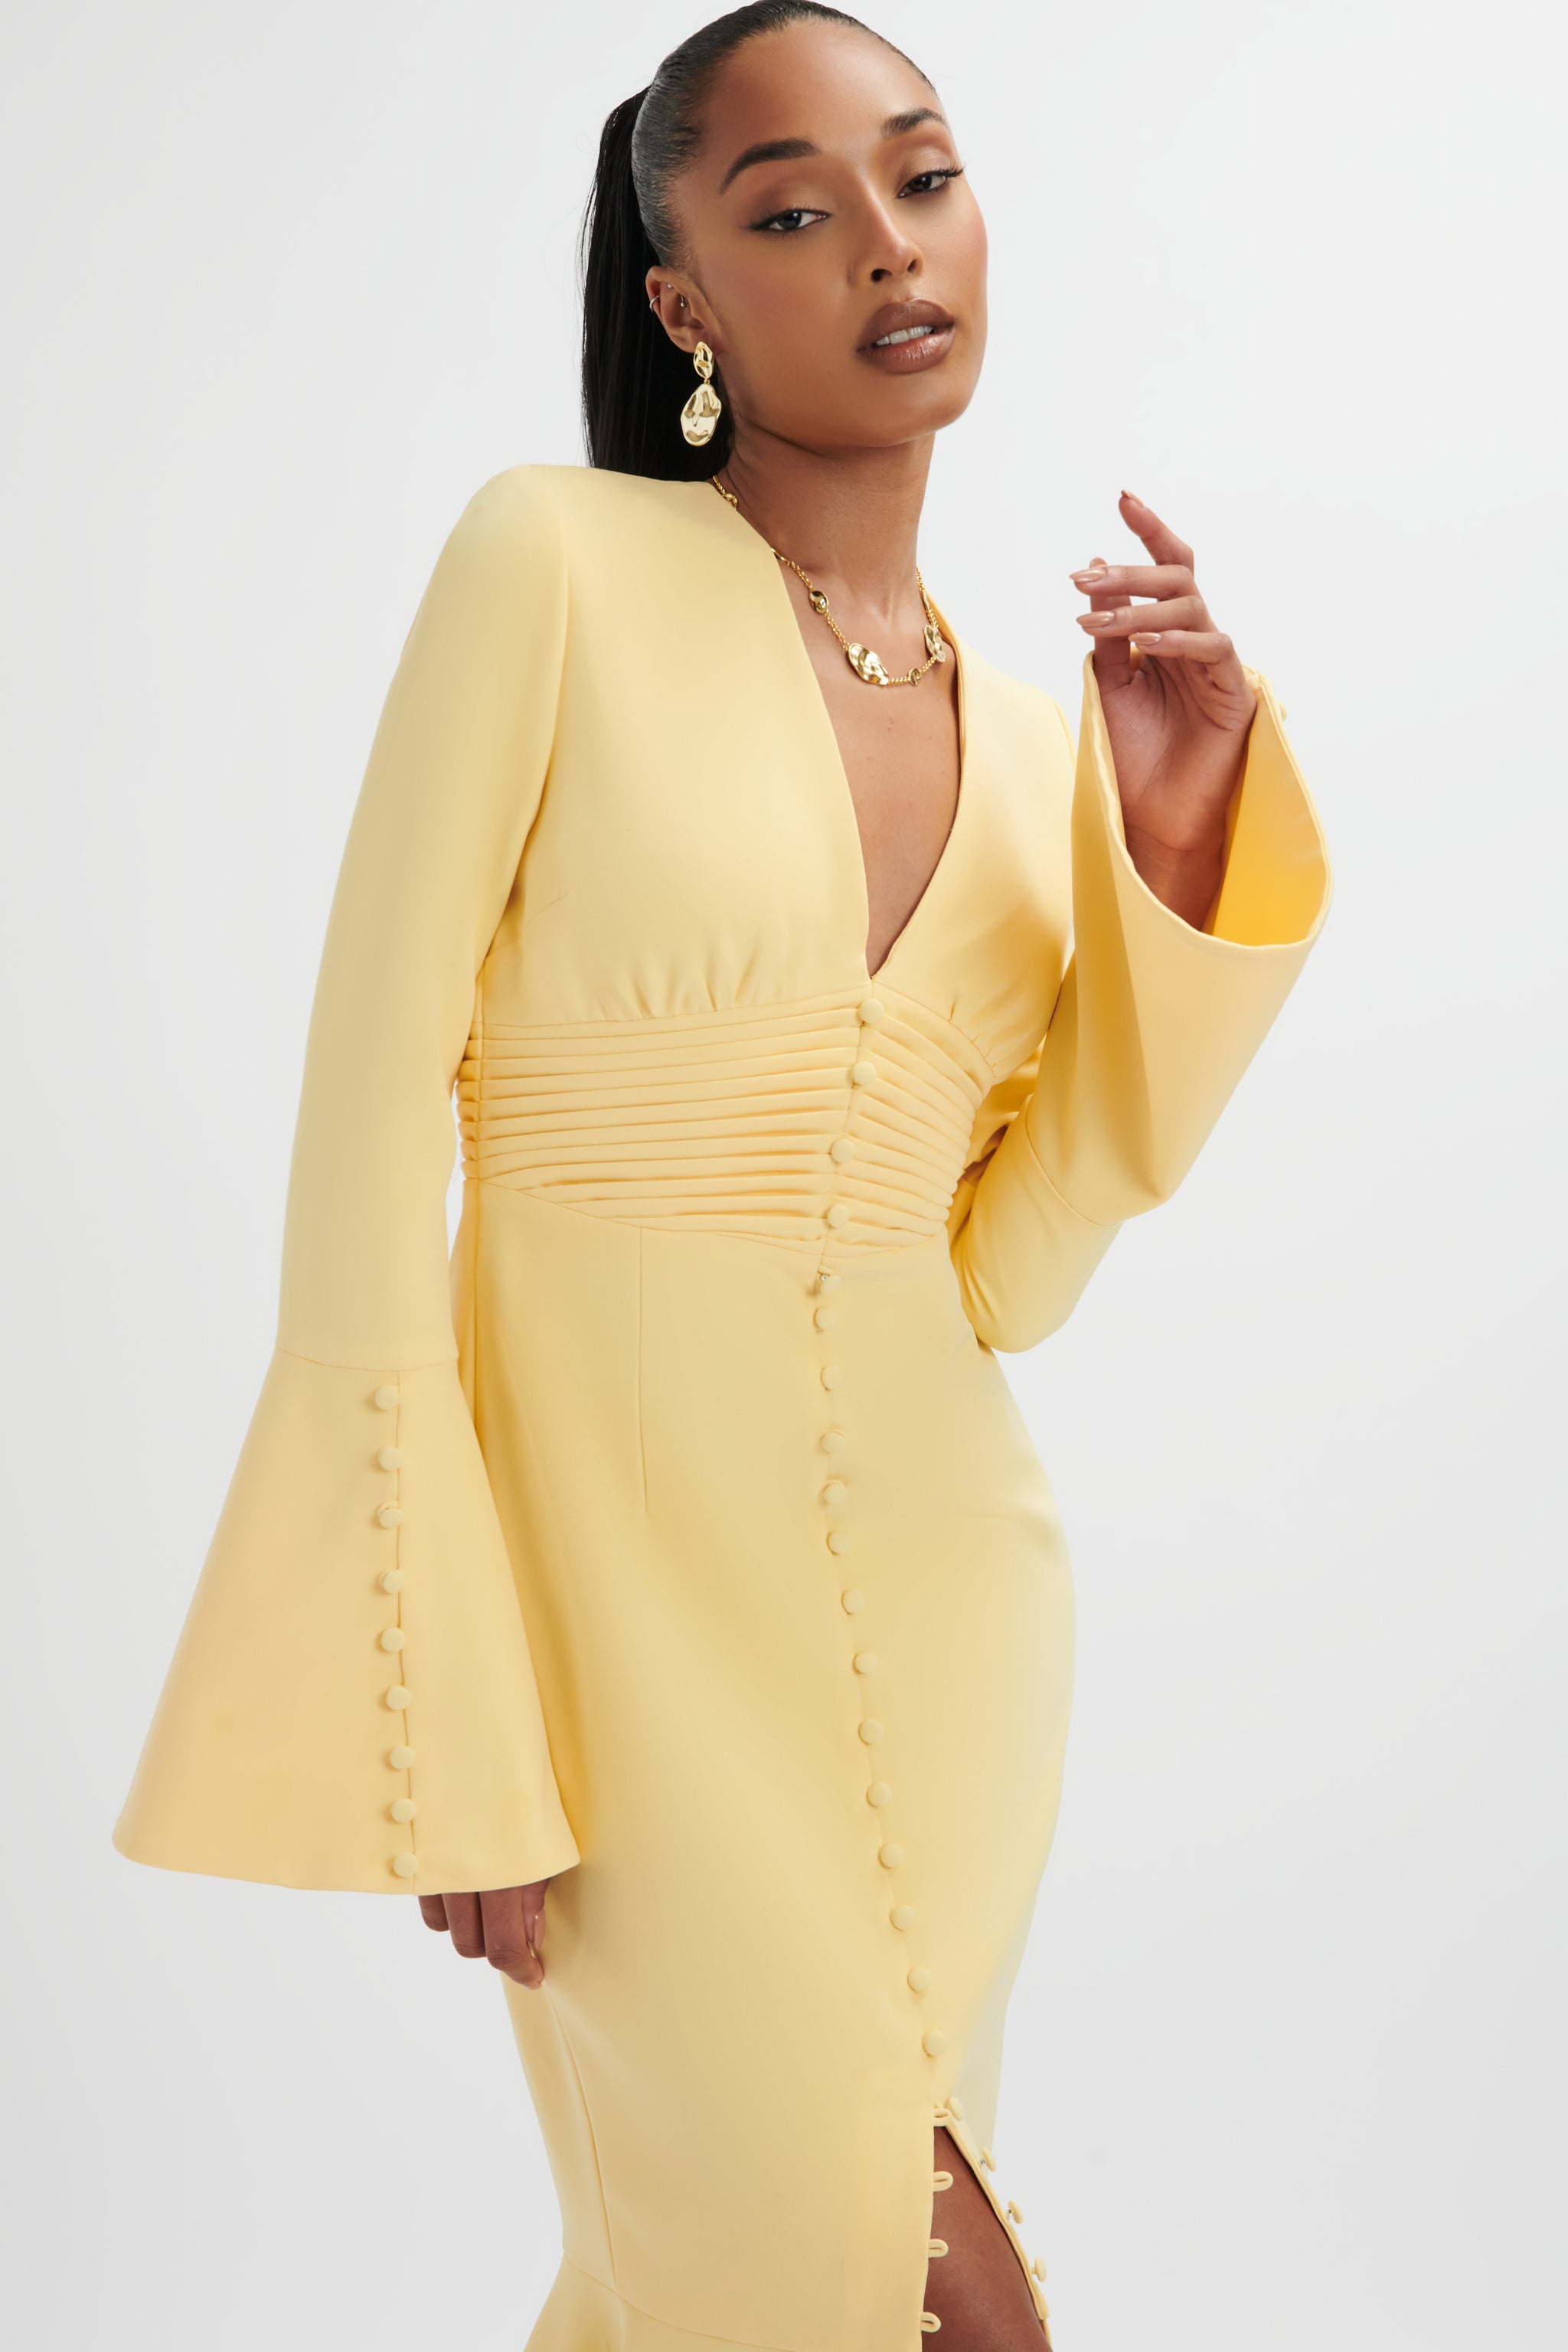 Seasalt Women's Dress - yellow Belle Fit-and-flare Midi Dress - Tall -  Mimosa Sp